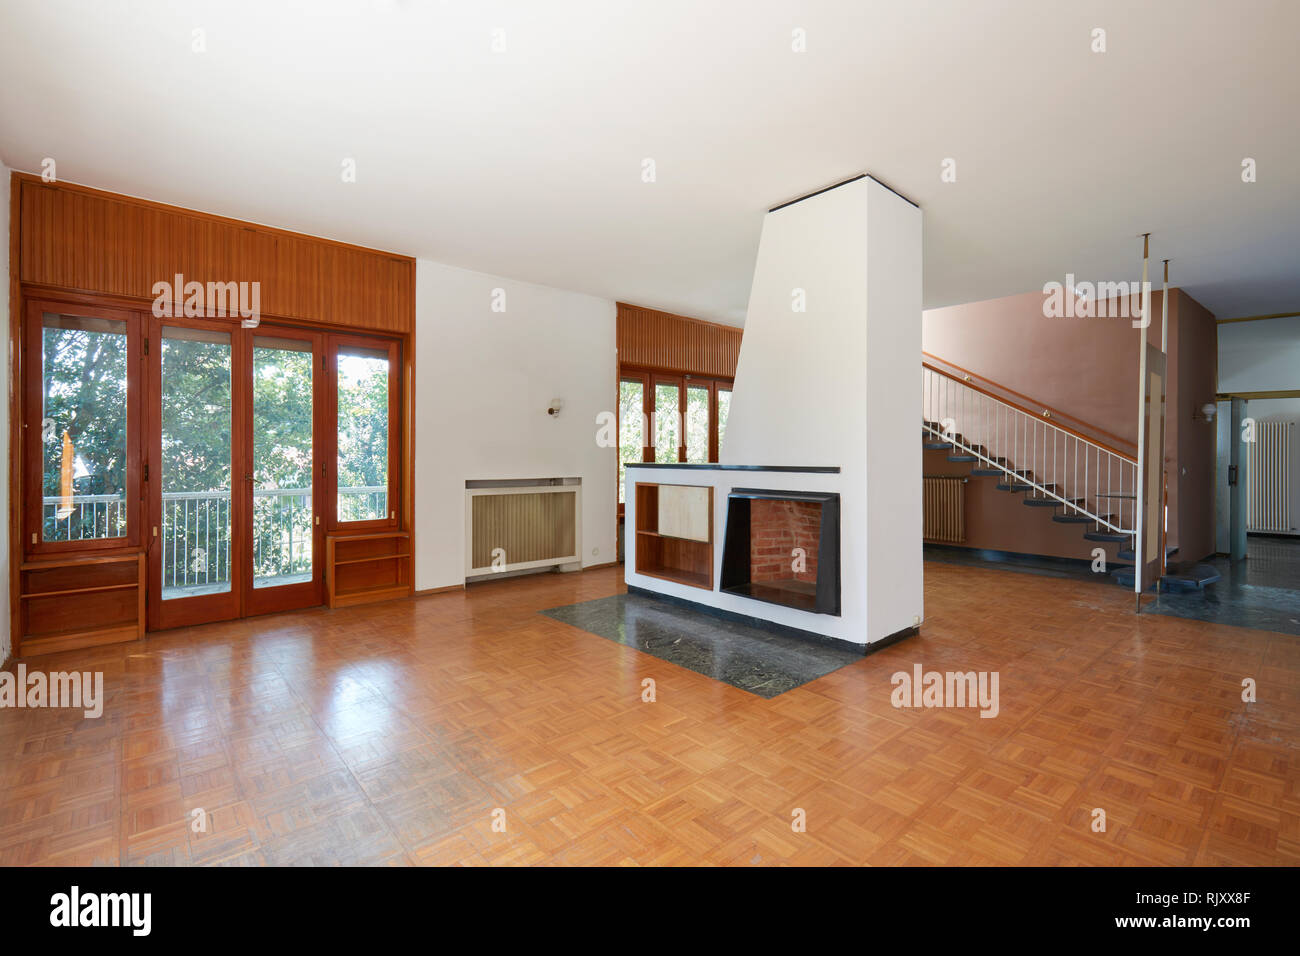 Empty living room with fireplace, apartment interior in old house with garden Stock Photo